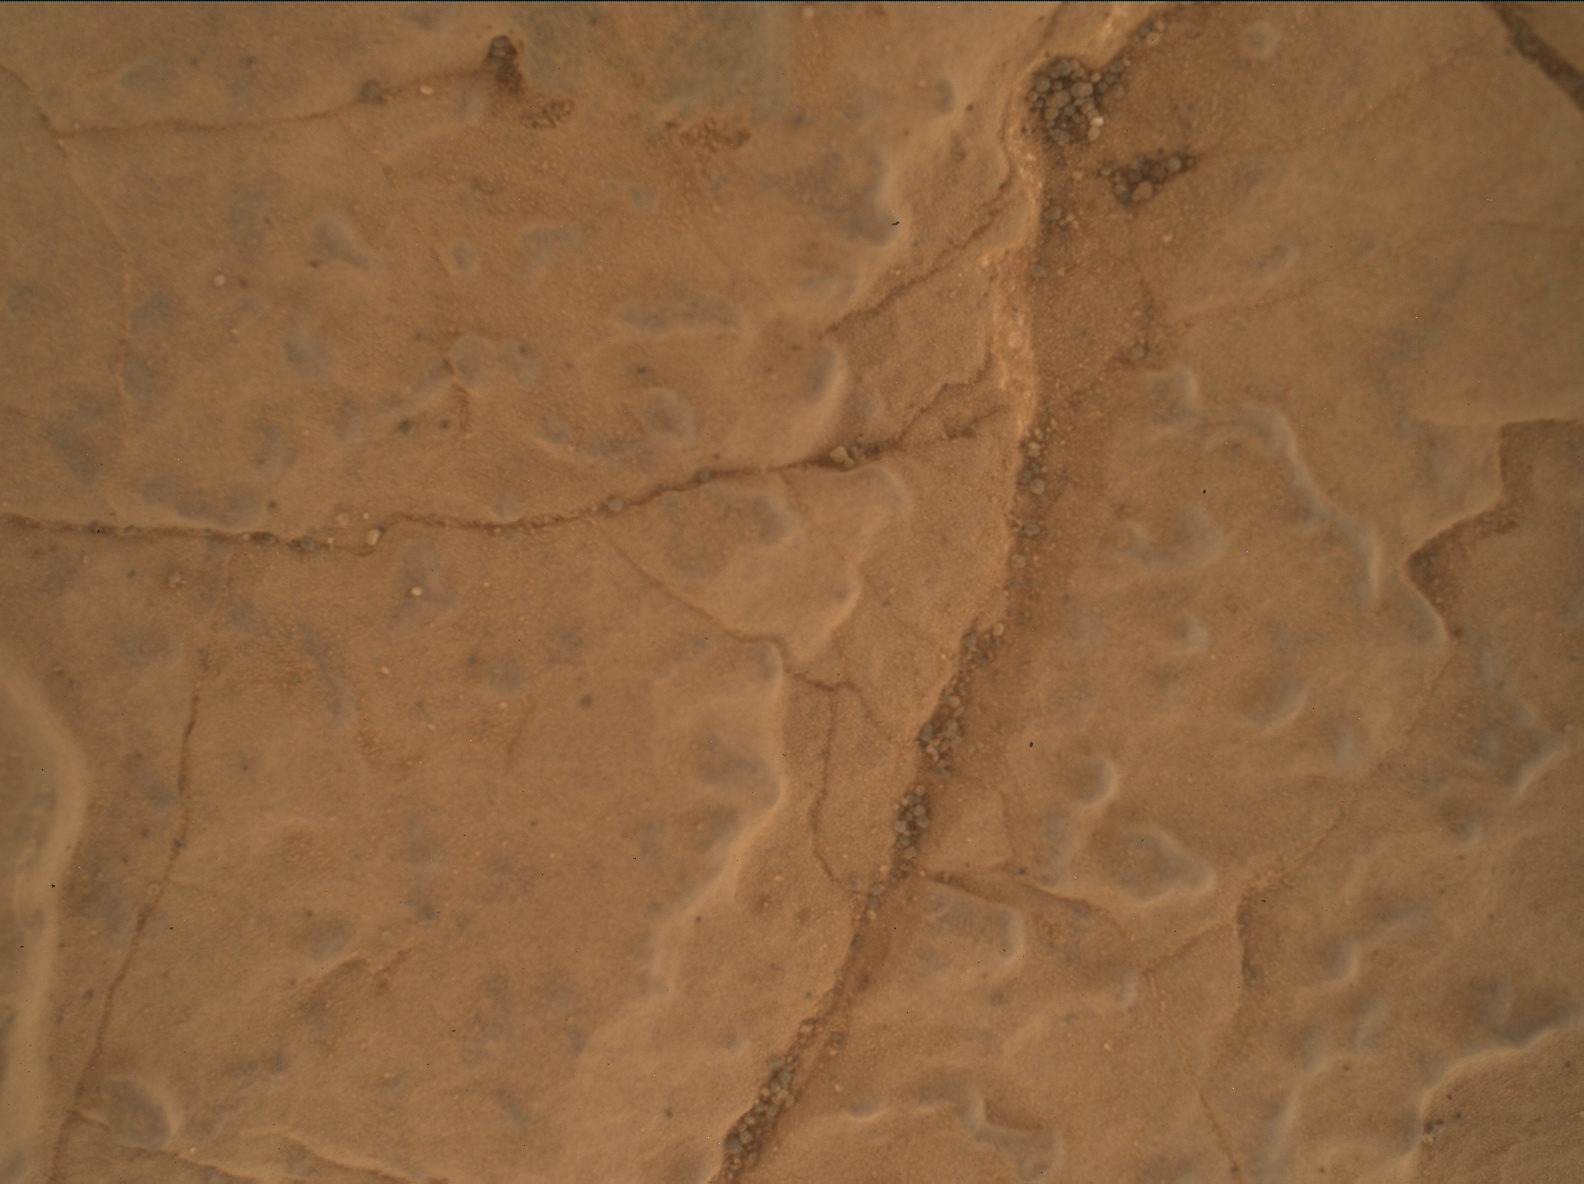 Nasa's Mars rover Curiosity acquired this image using its Mars Hand Lens Imager (MAHLI) on Sol 3027